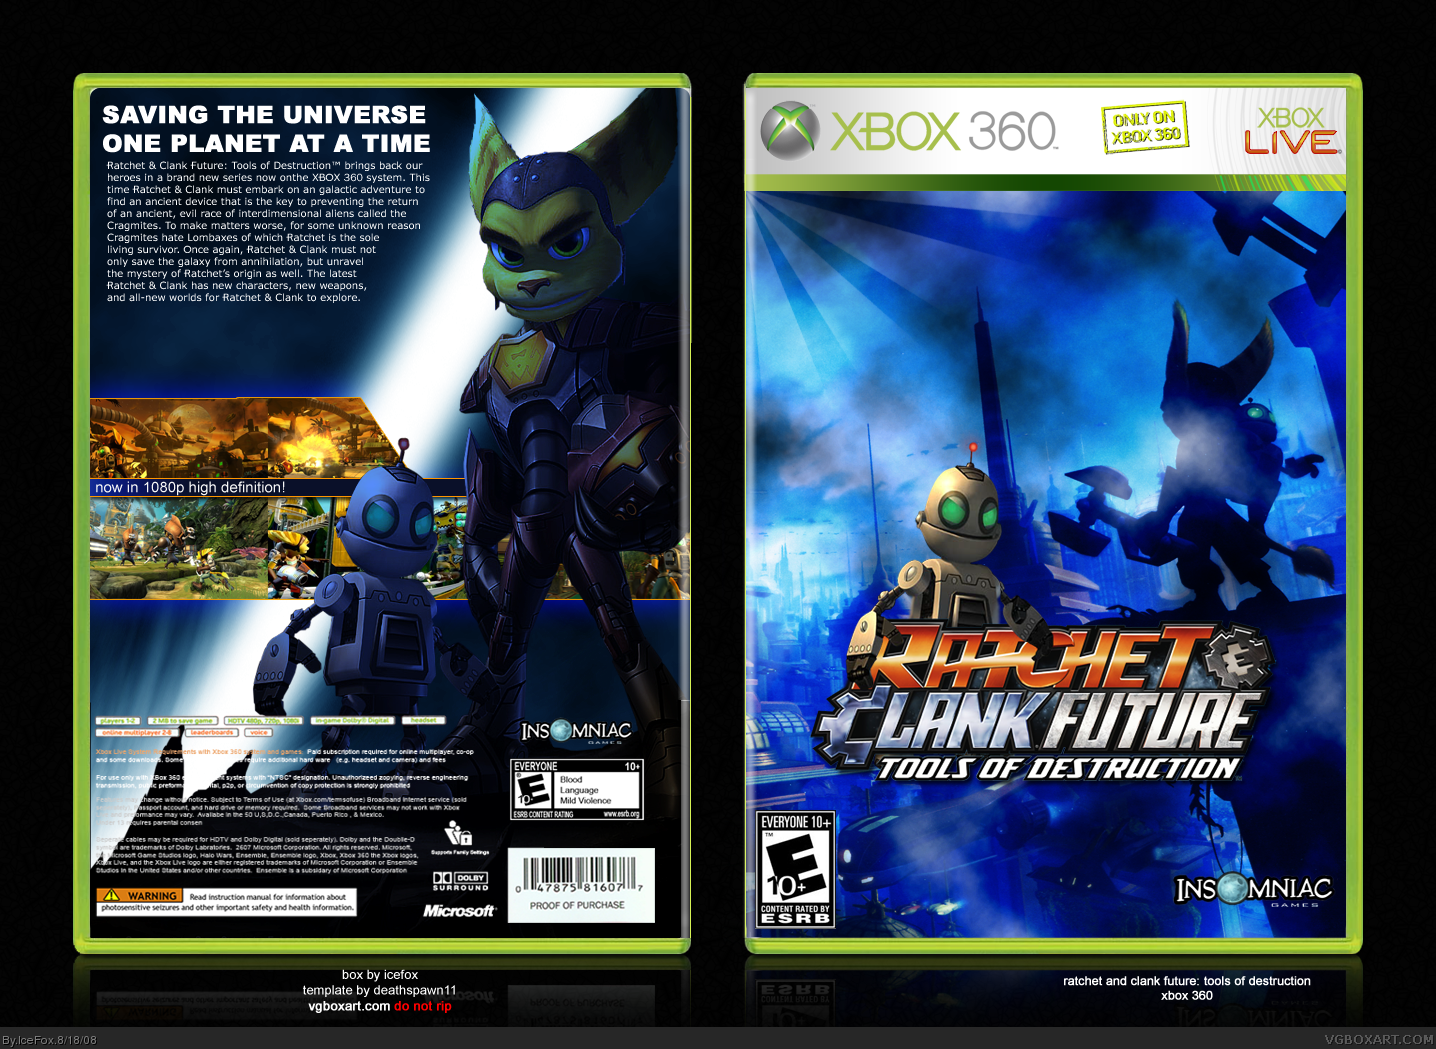 Ratchet and Clank Future: Tools of Destruction box cover